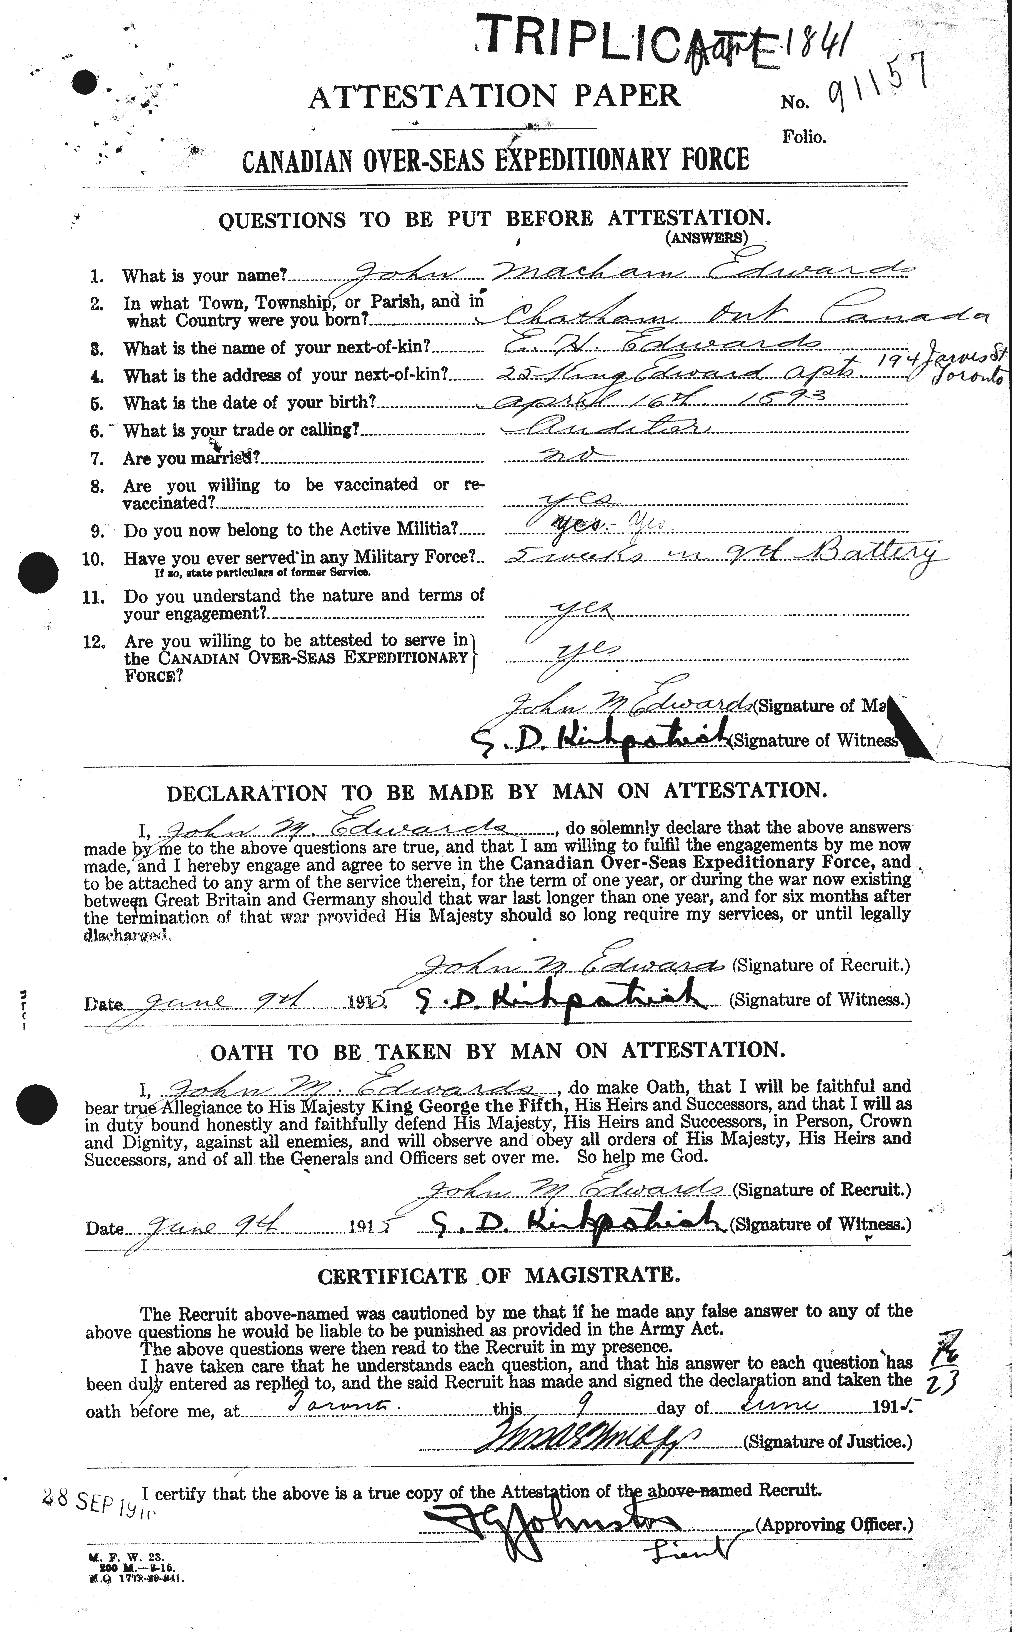 Personnel Records of the First World War - CEF 310149a